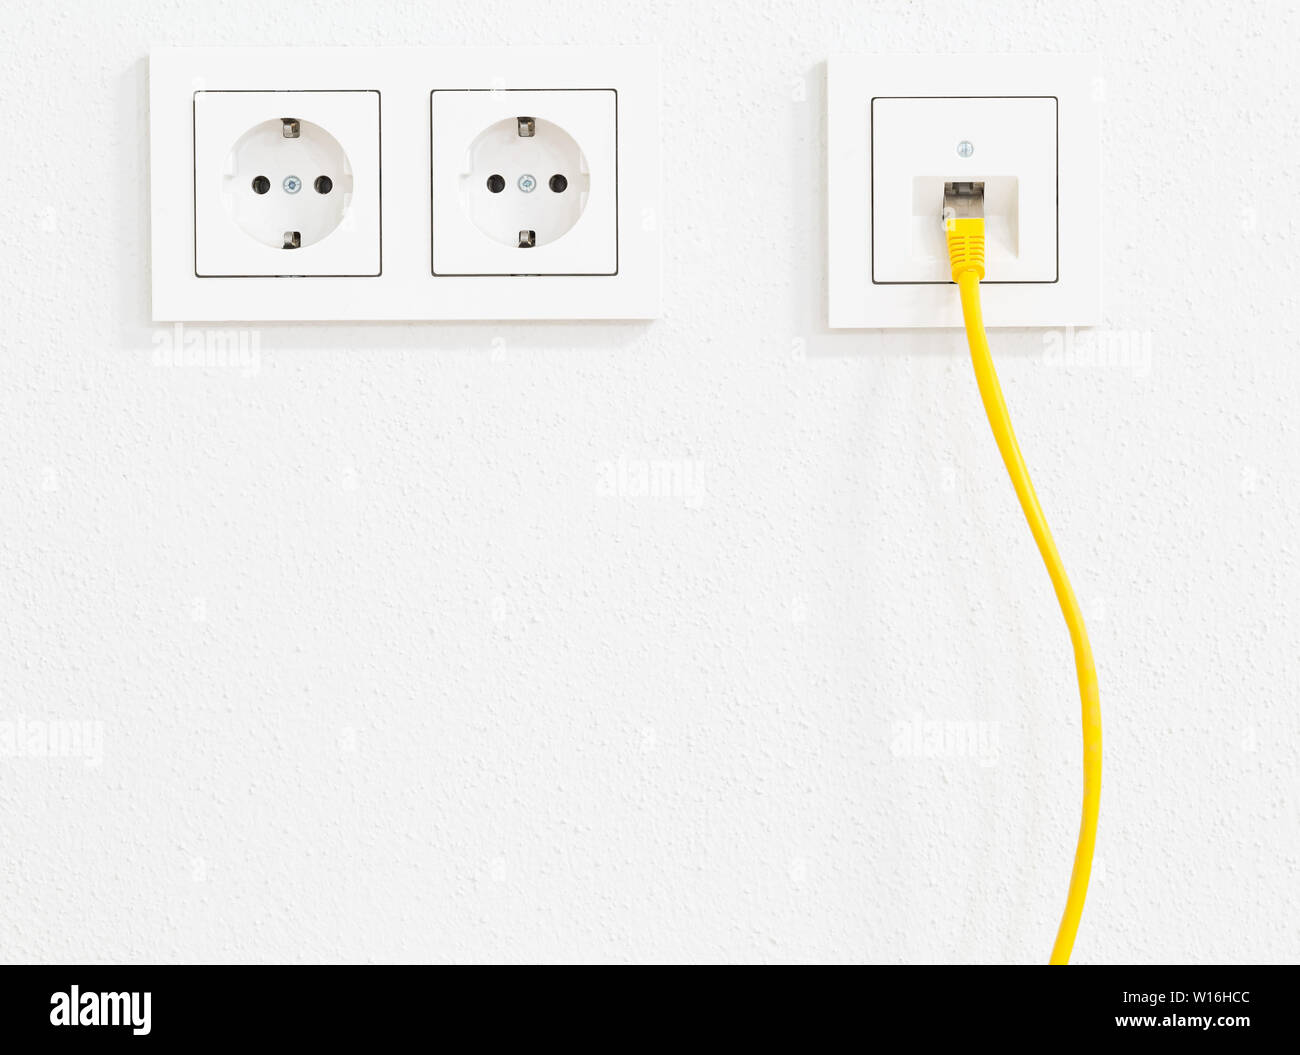 Yellow network cable in wall outlet for office or private home lan ethernet  connection with power outlets flat view on white plaster wall background  Stock Photo - Alamy